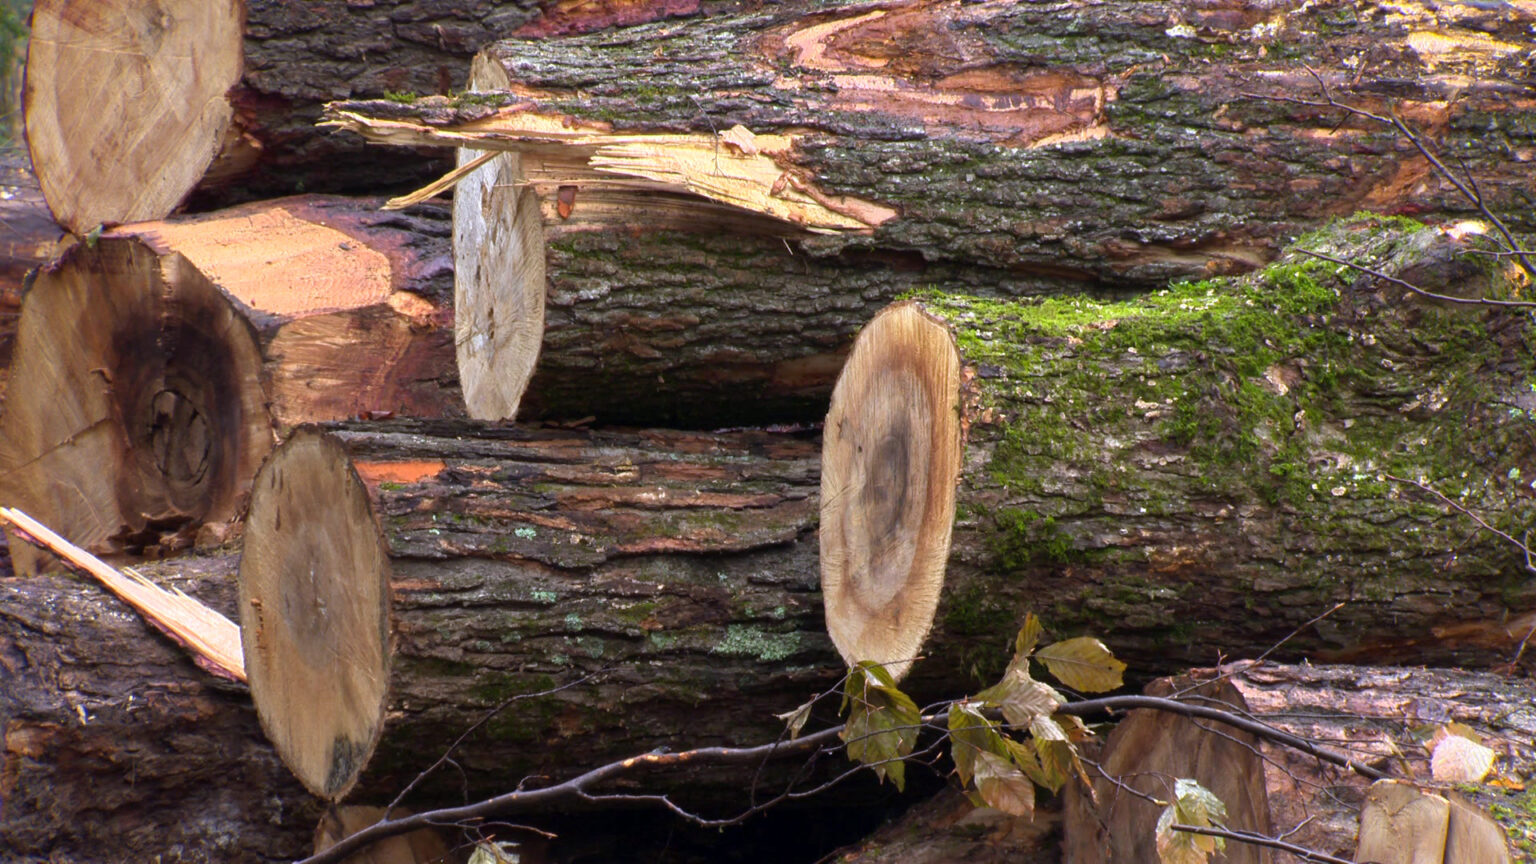 Multiple logs of tree trunks with moss growing in their bark are piled in a stack.